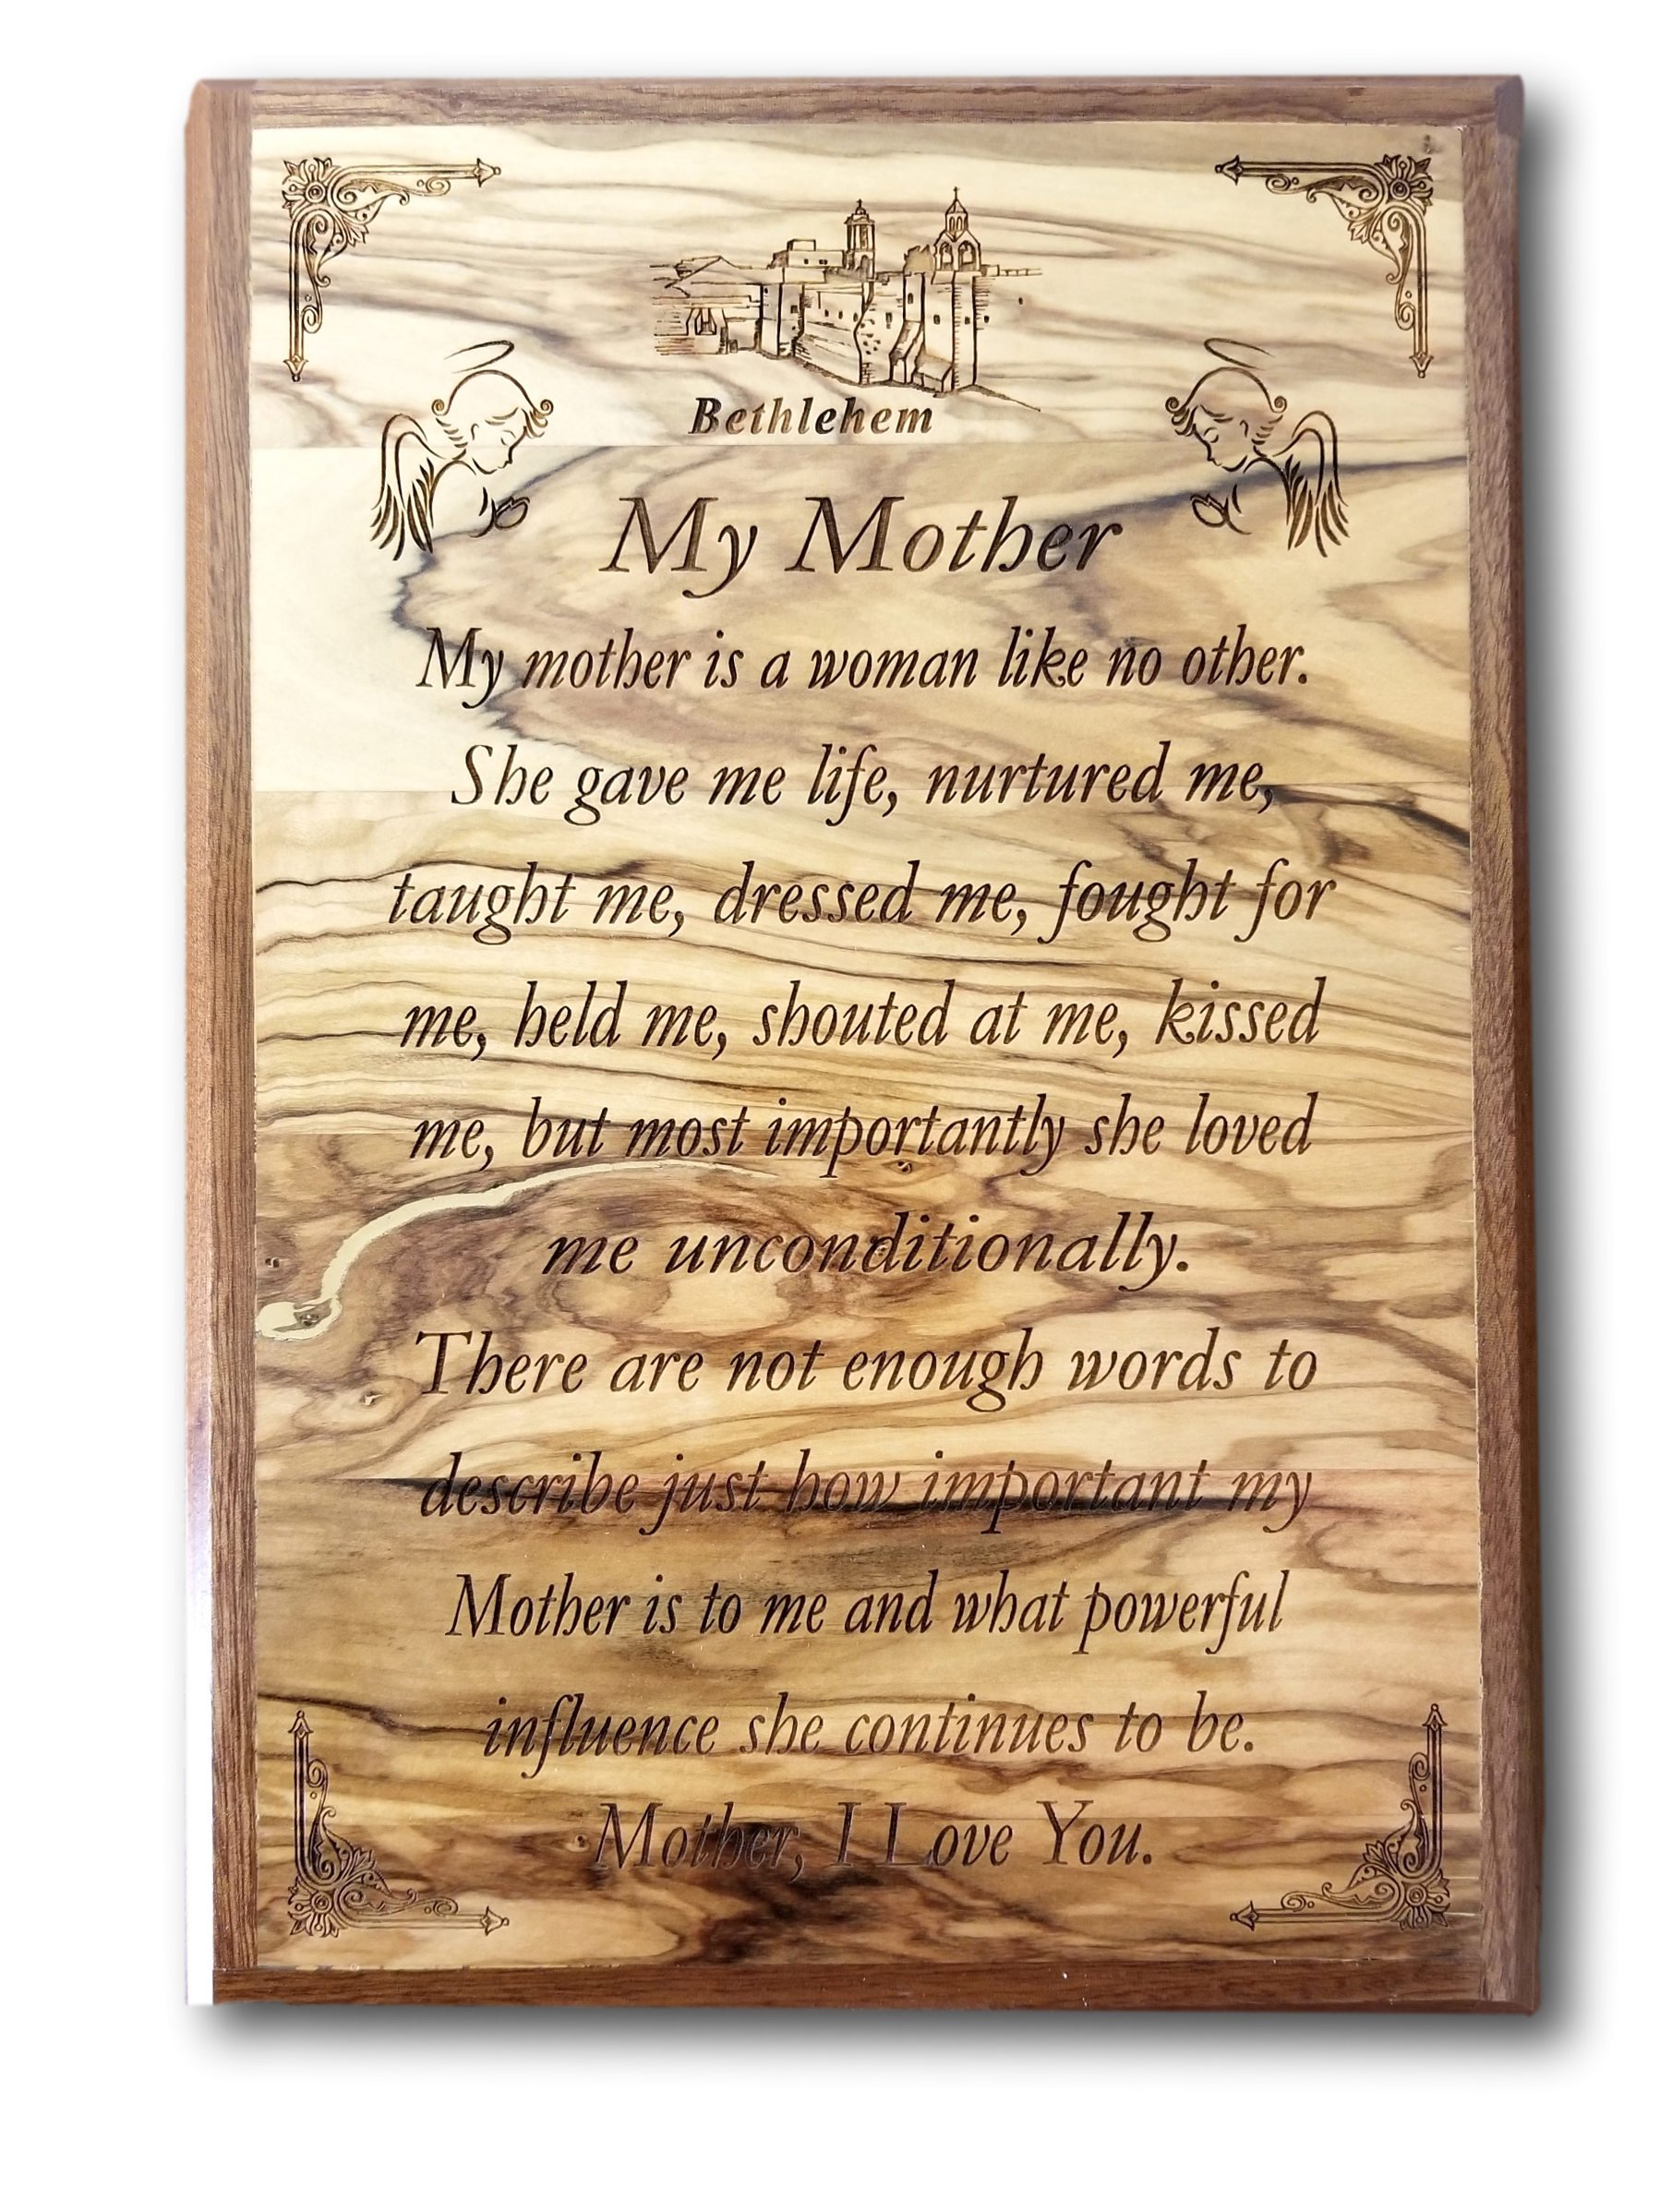 My Mother plaque, Size: 8.5" x 12.2"